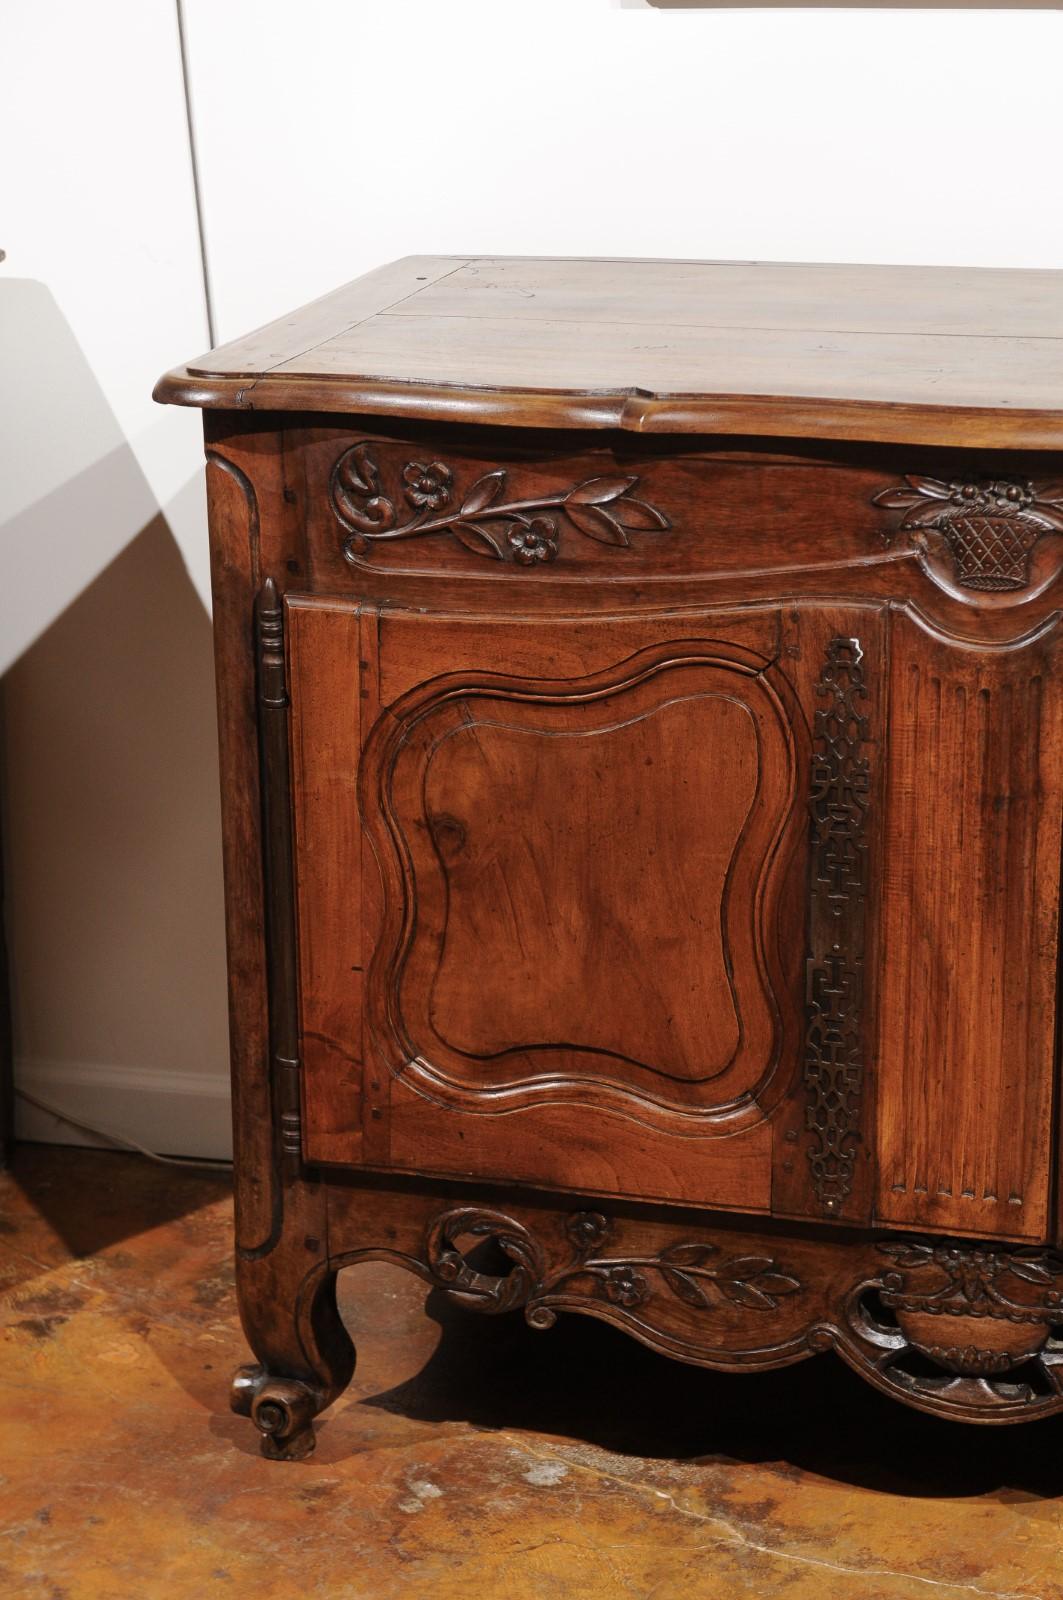 19th Century French Louis XV Style Hand-Carved Walnut Buffet, circa 1800 with Floral Motifs